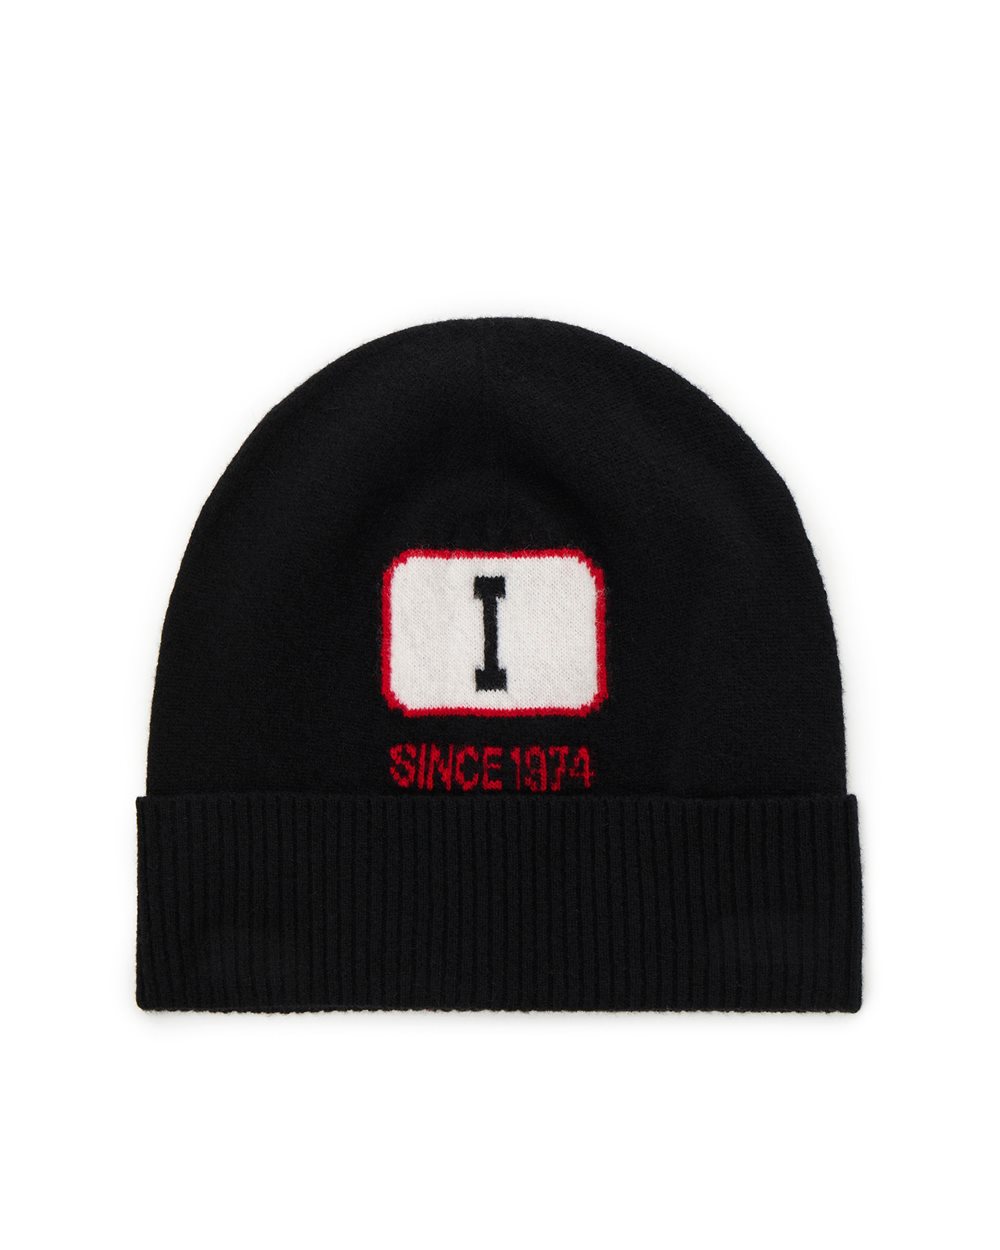 Black wool beanie with logo -  ( SECONDO STEP US )  PROMO UP TO 50%  | Iceberg - Official Website